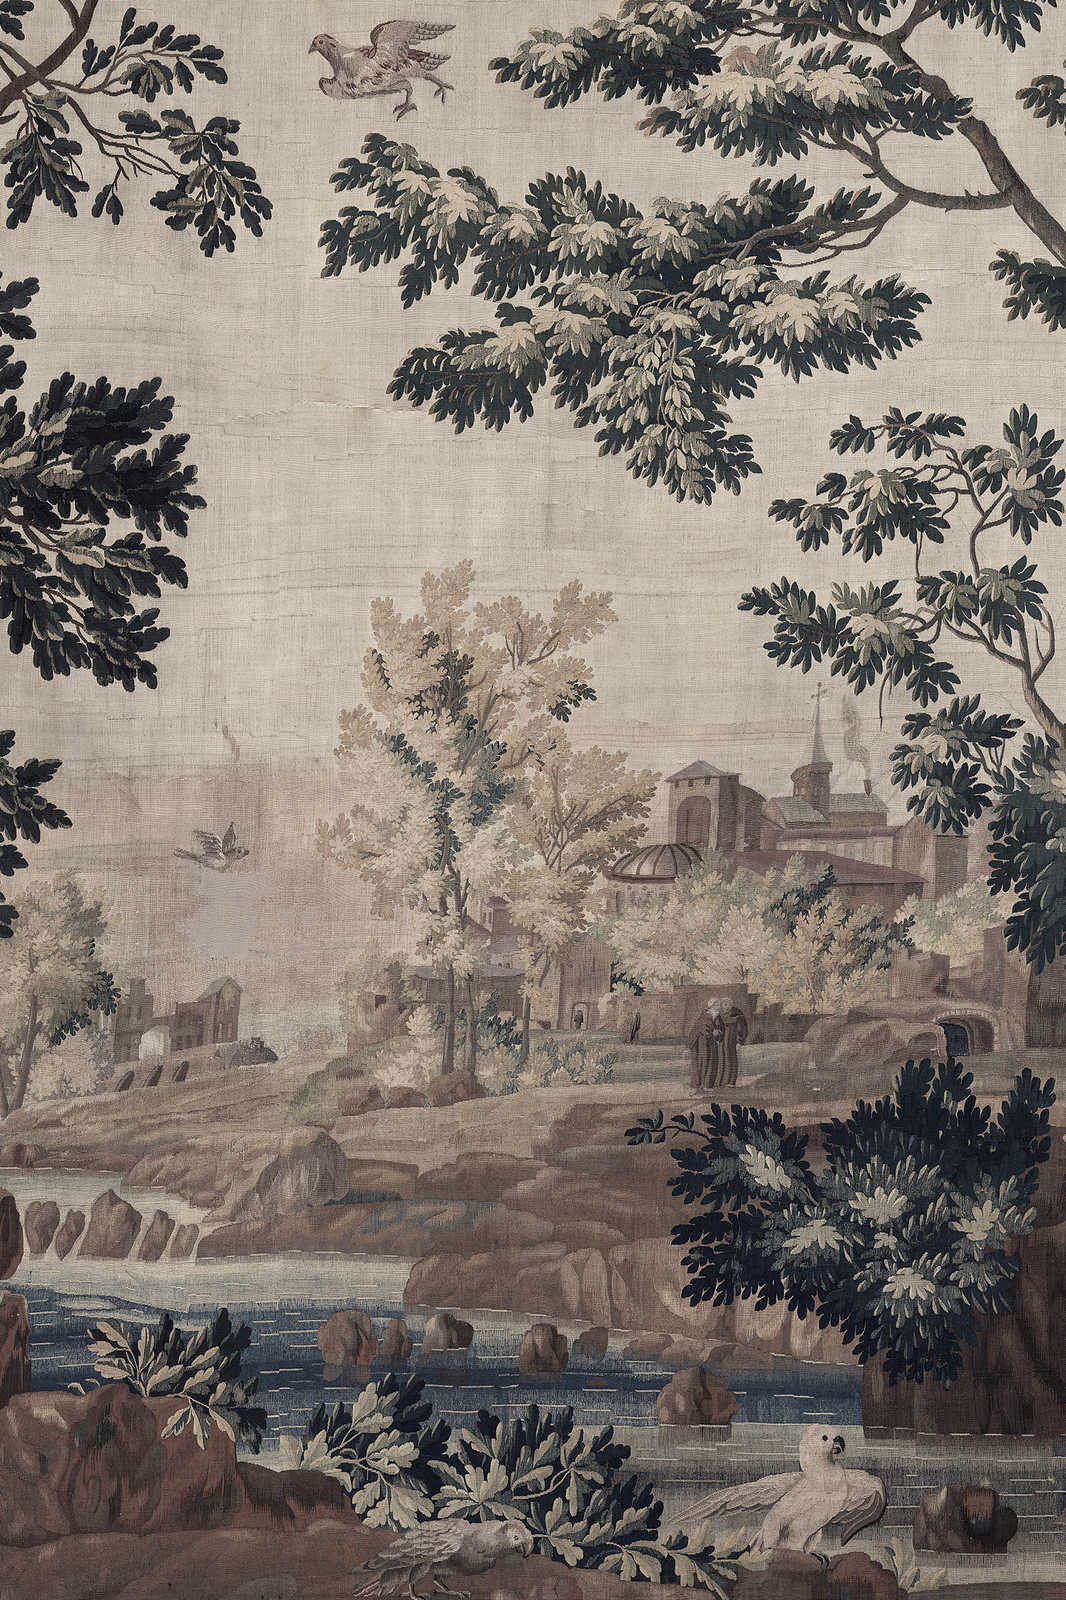             Gobelin Gallery 1 - Landscape canvas picture historical tapestry - 1.20 m x 0.80 m
        